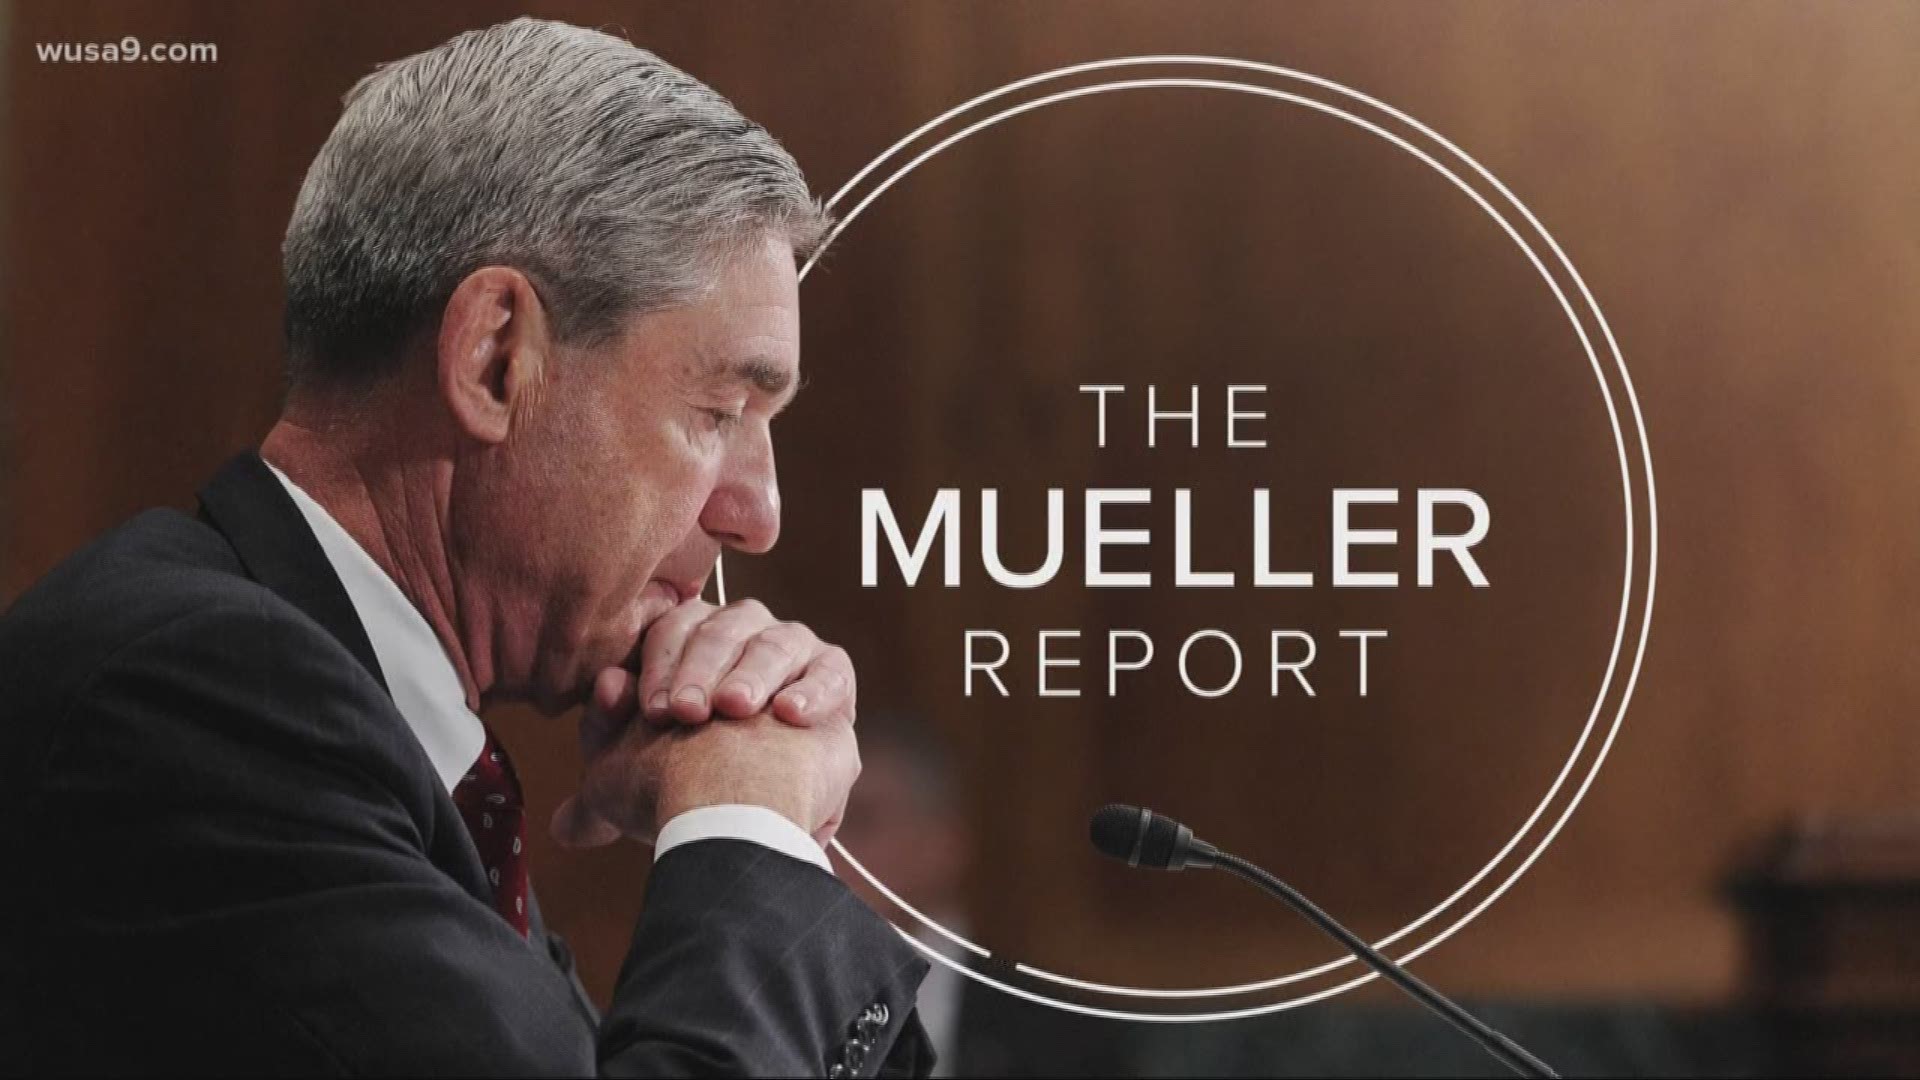 Mueller said he doesn't plan to say anything that's not already in his report. But the house judiciary committee chairman says this week's hearings will highlight findings of wrongdoing by President Trump.